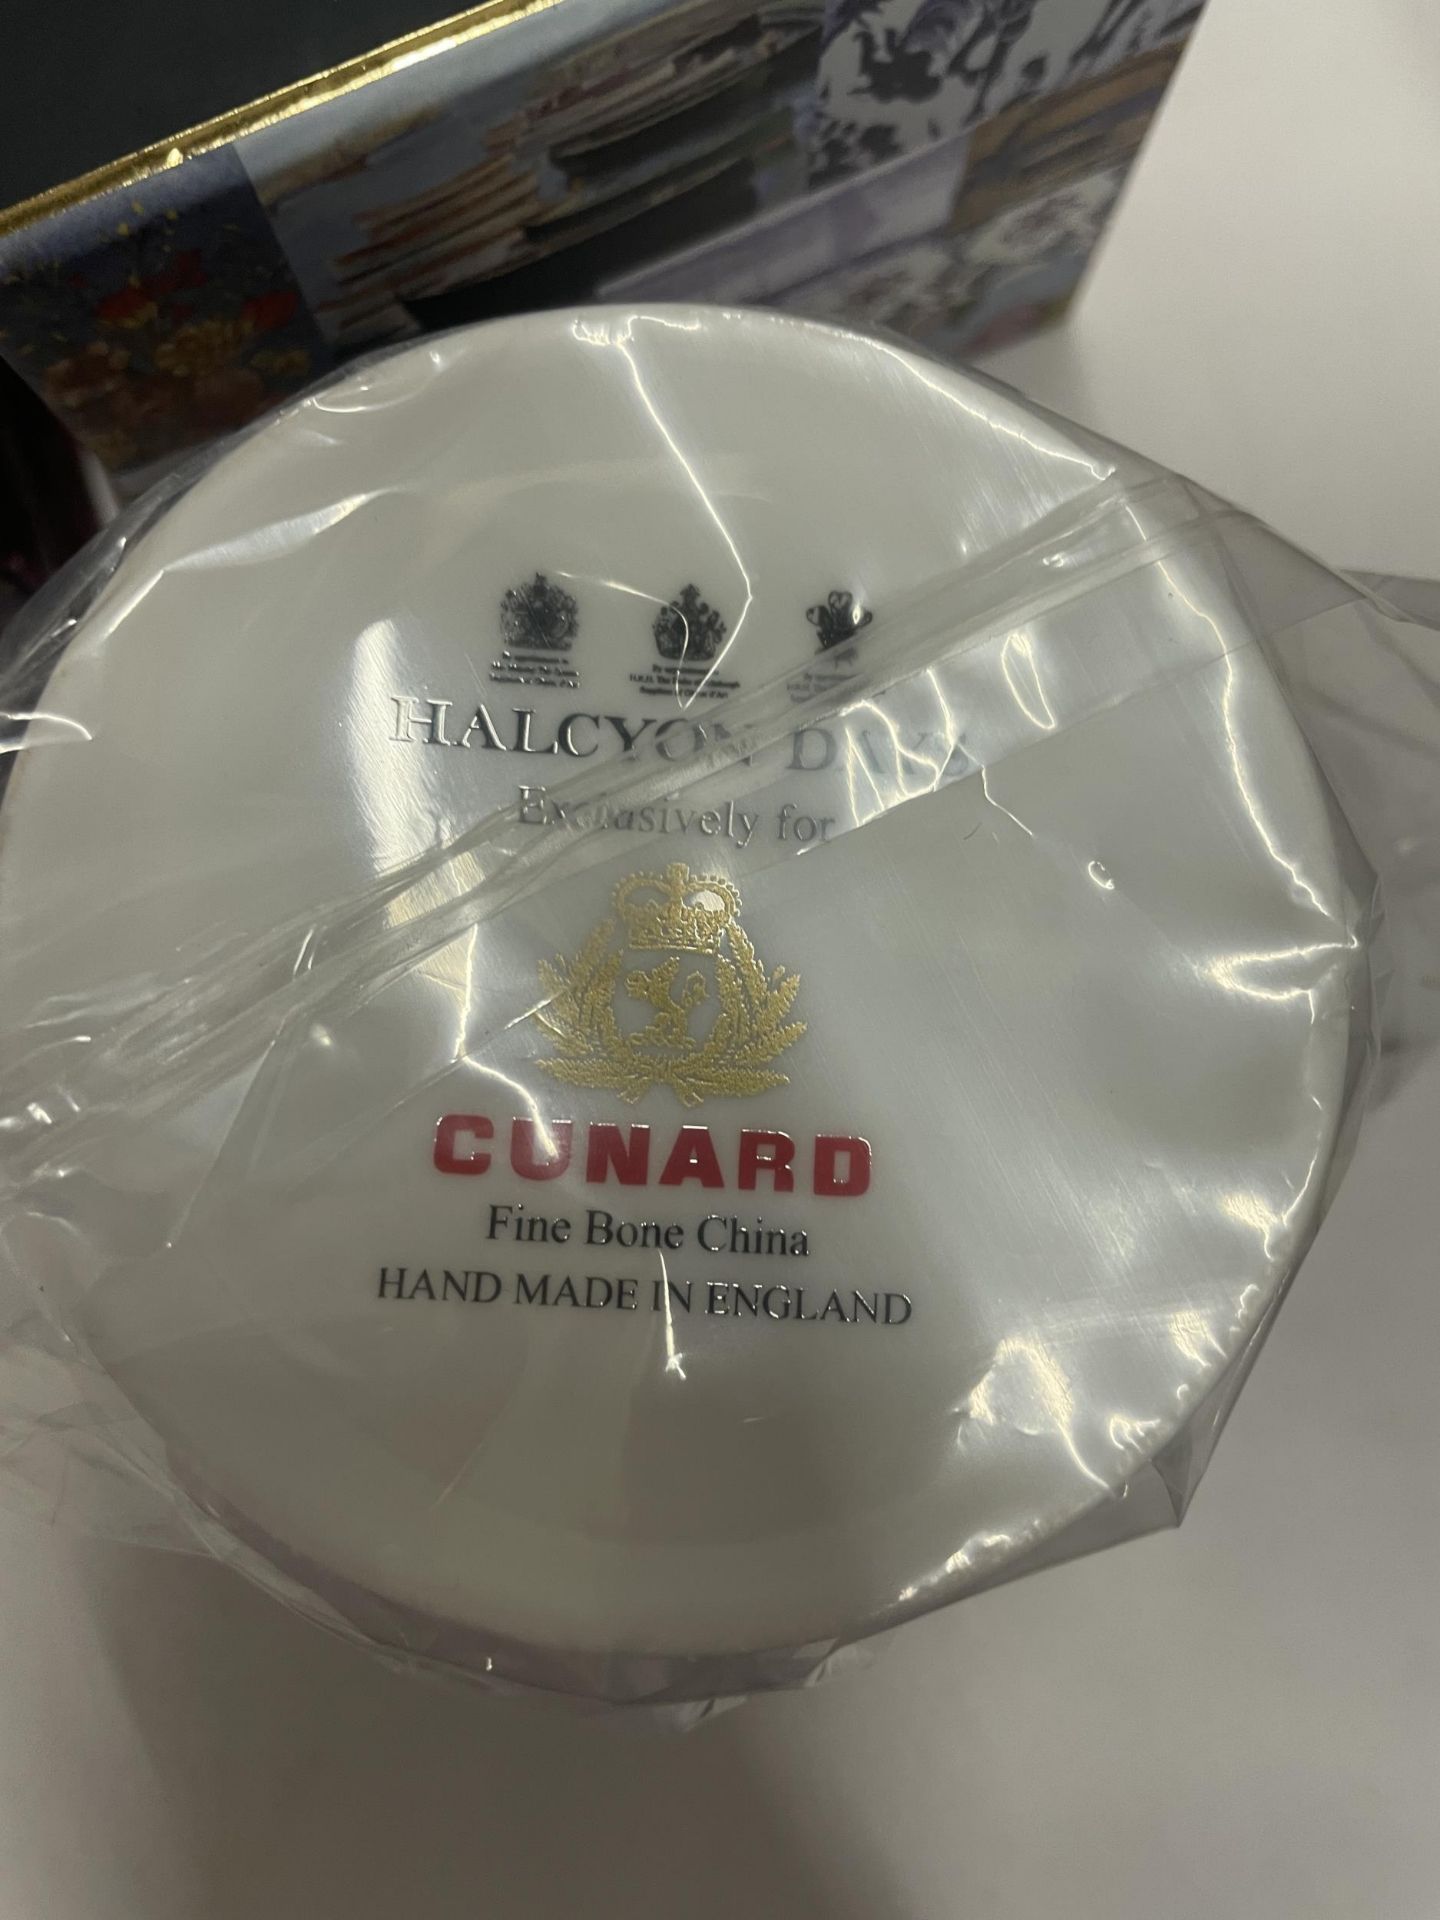 THREE NEW AND BOXED HALCYON DAYS MUGS MADE FOR CUNARD - Bild 3 aus 3